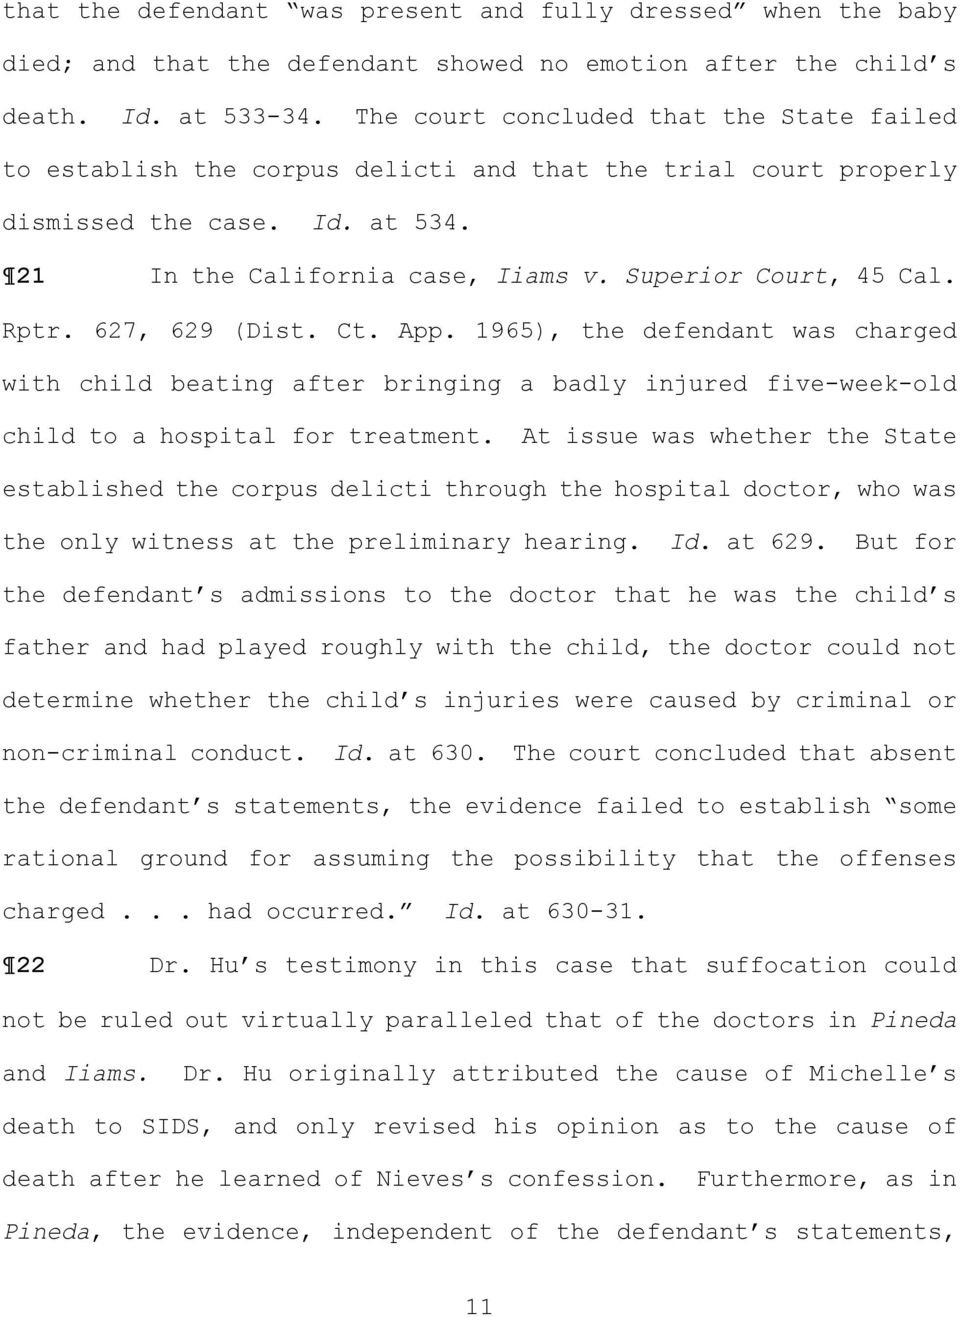 Rptr. 627, 629 (Dist. Ct. App. 1965, the defendant was charged with child beating after bringing a badly injured five-week-old child to a hospital for treatment.